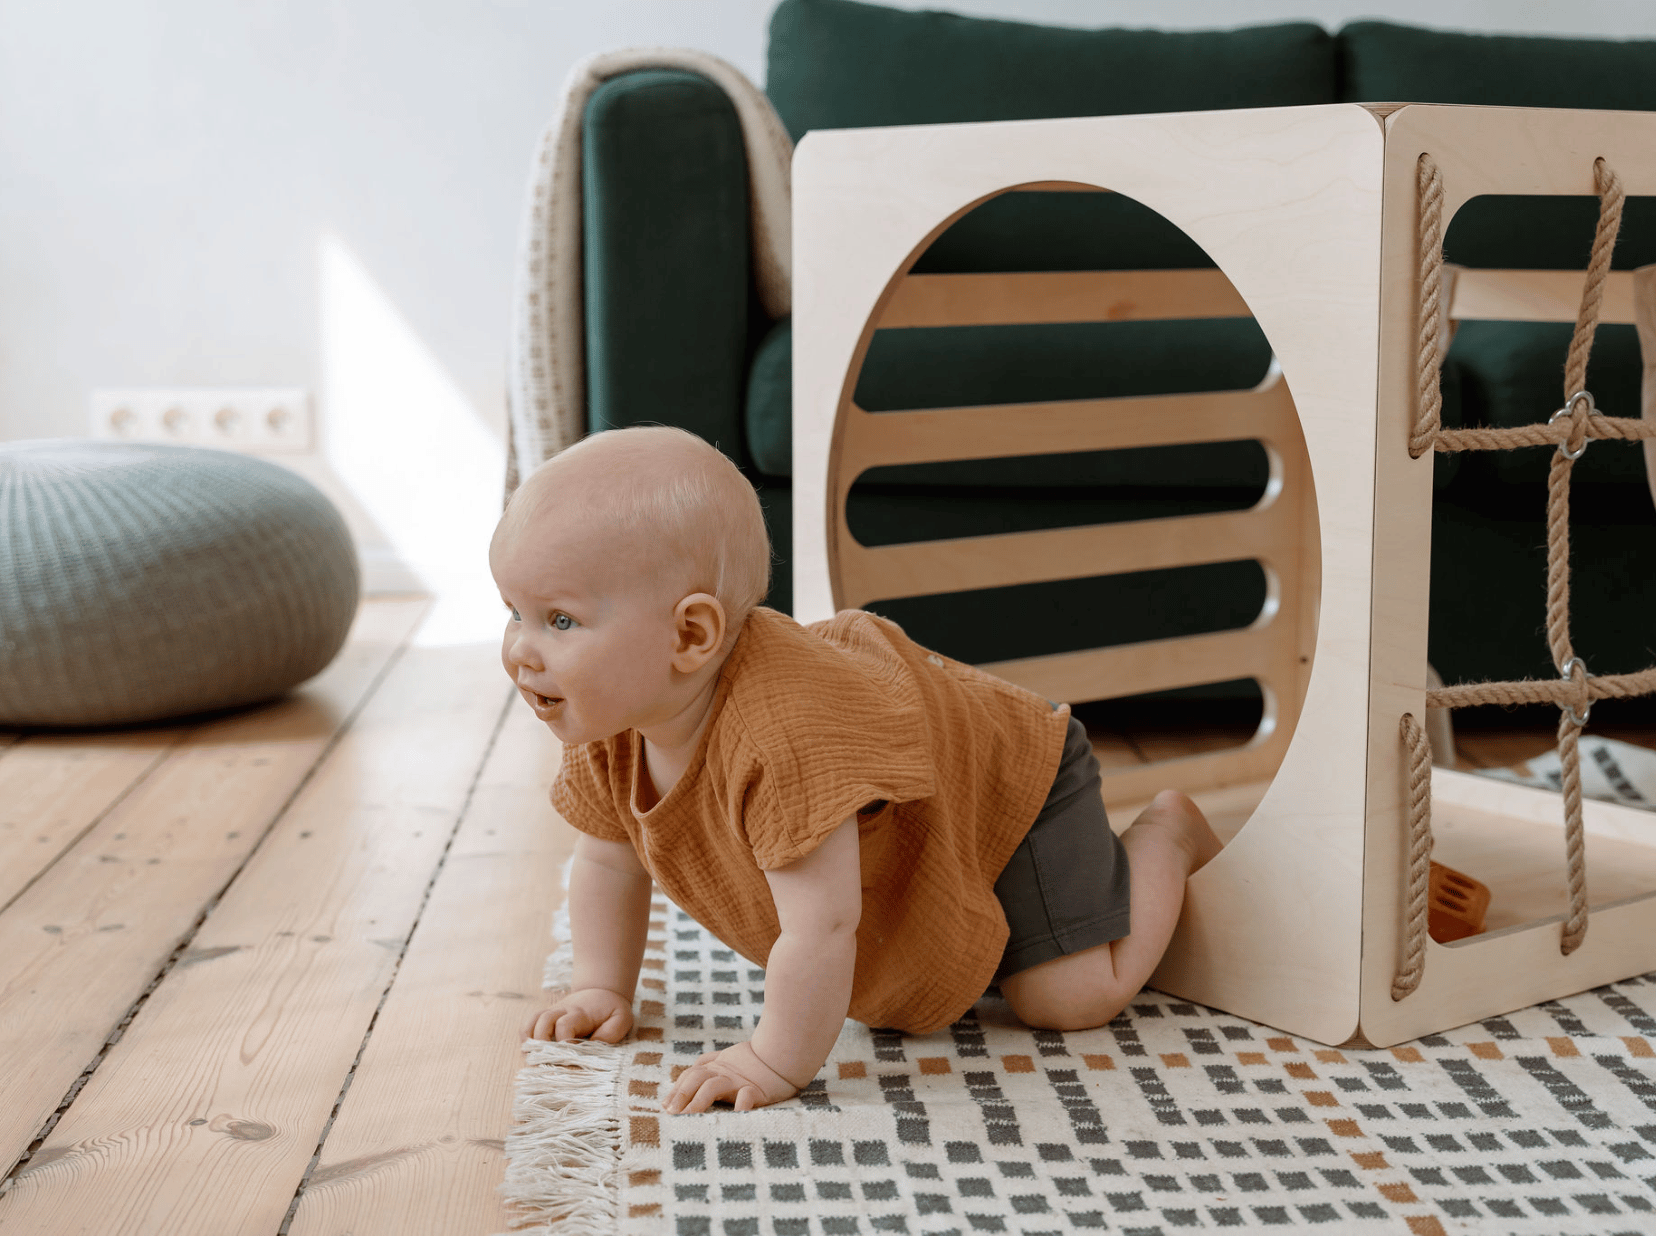 Supports learning to crawl